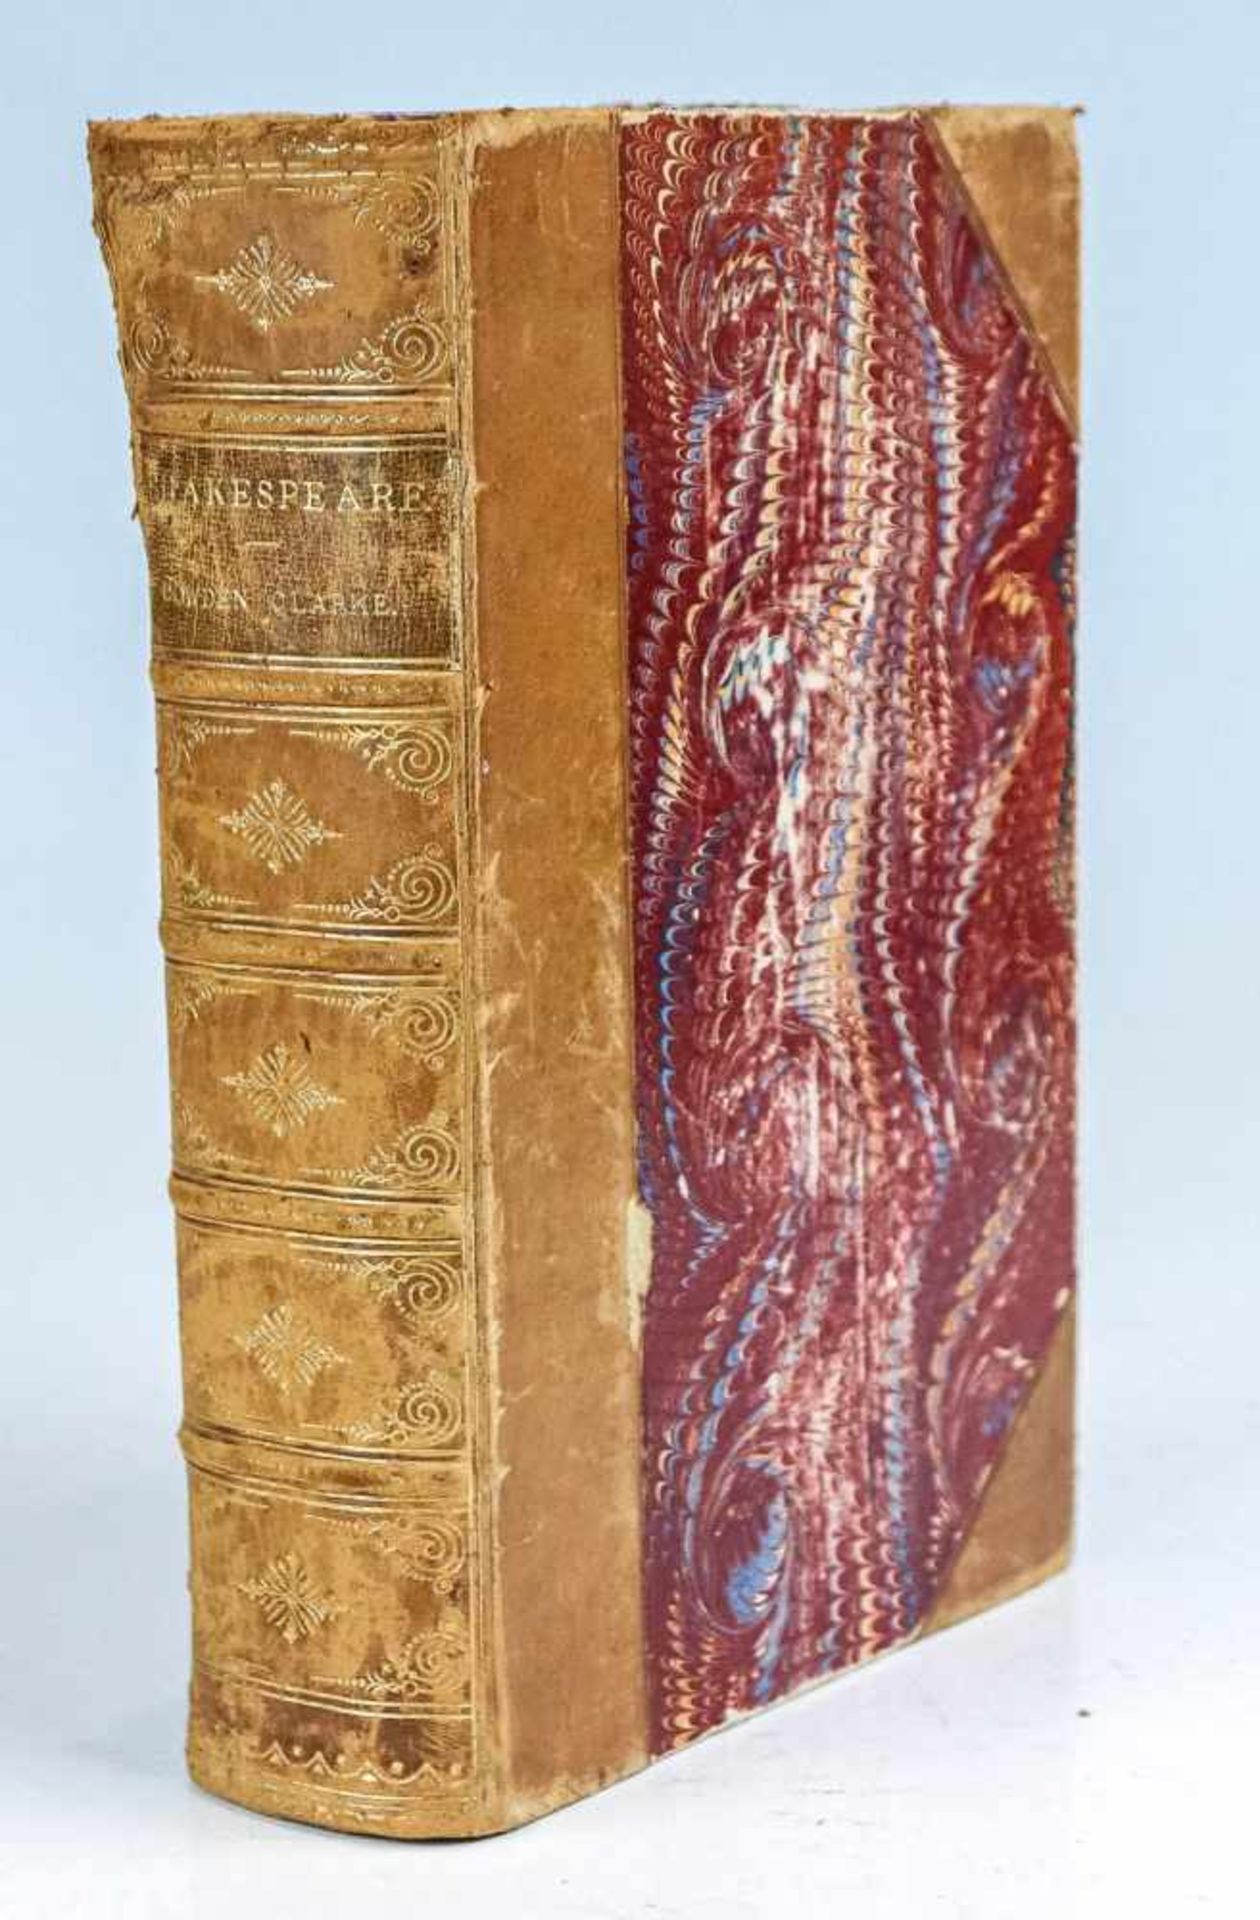 Cowden Clarke, Charles and MaryThe works of William ShakespearePublished by Bickers and Son.